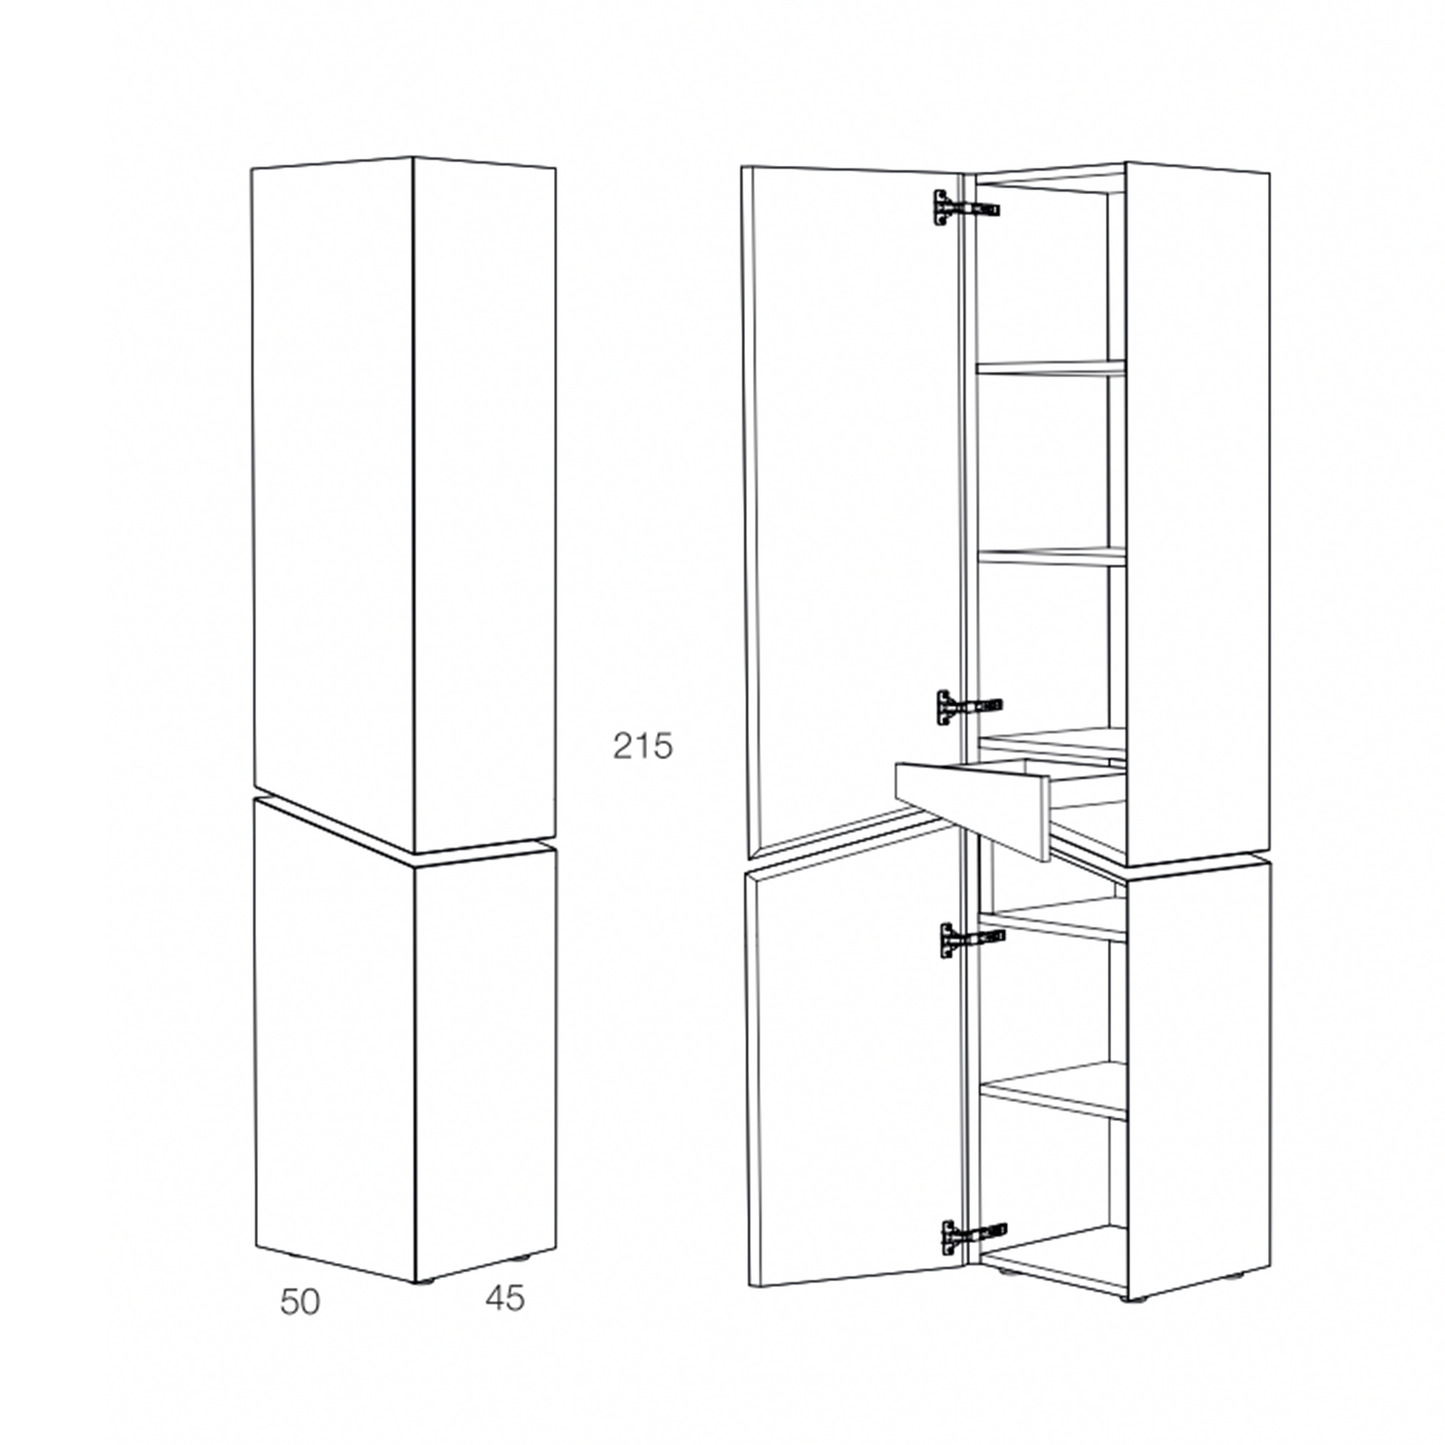 Technical drawing of Samurai storage cabinet with dimensions.